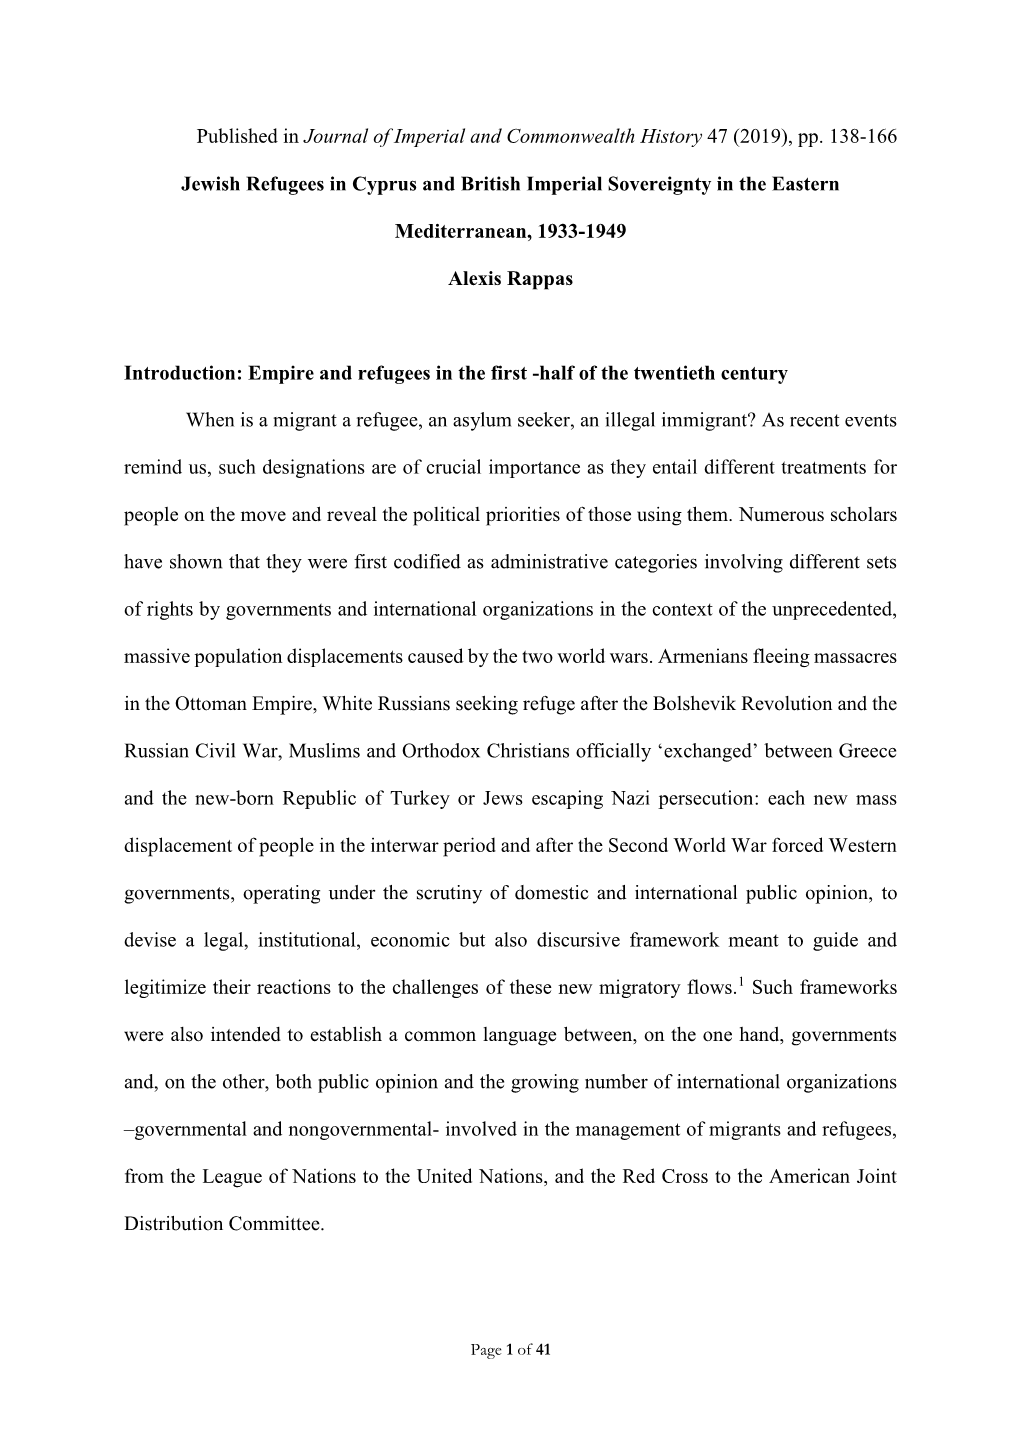 Published in Journal of Imperial and Commonwealth History 47 (2019), Pp. 138-166 Jewish Refugees in Cyprus and British Imperial